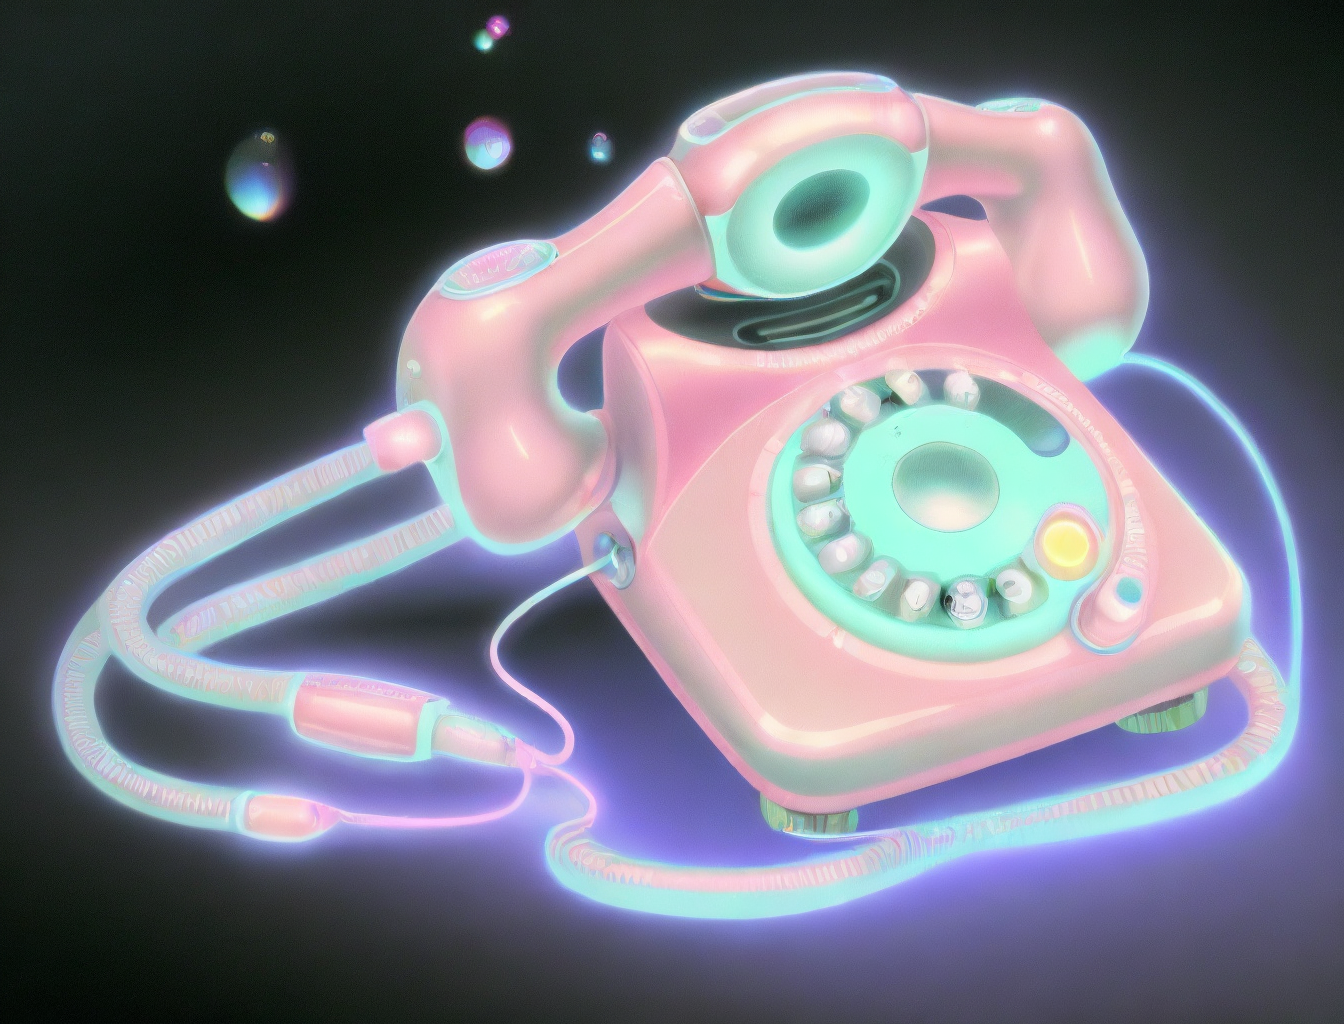 illustration of an pink 70s retro rotary landline phone, curly cord,  phone decorated with crystals, butterfly, airbrush art stye illustration, bubbles, gloomy nebulous light, gradient